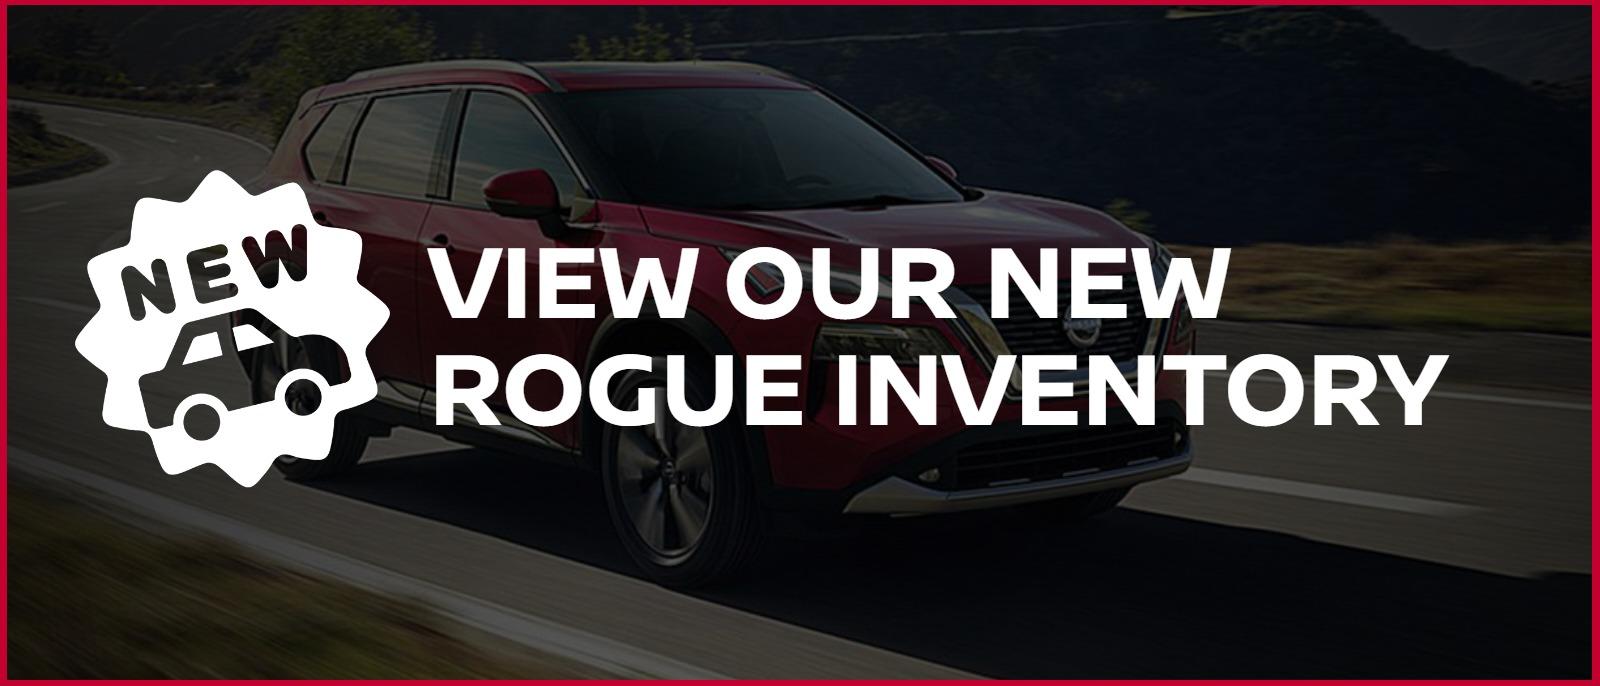 View our New Rogue Inventory